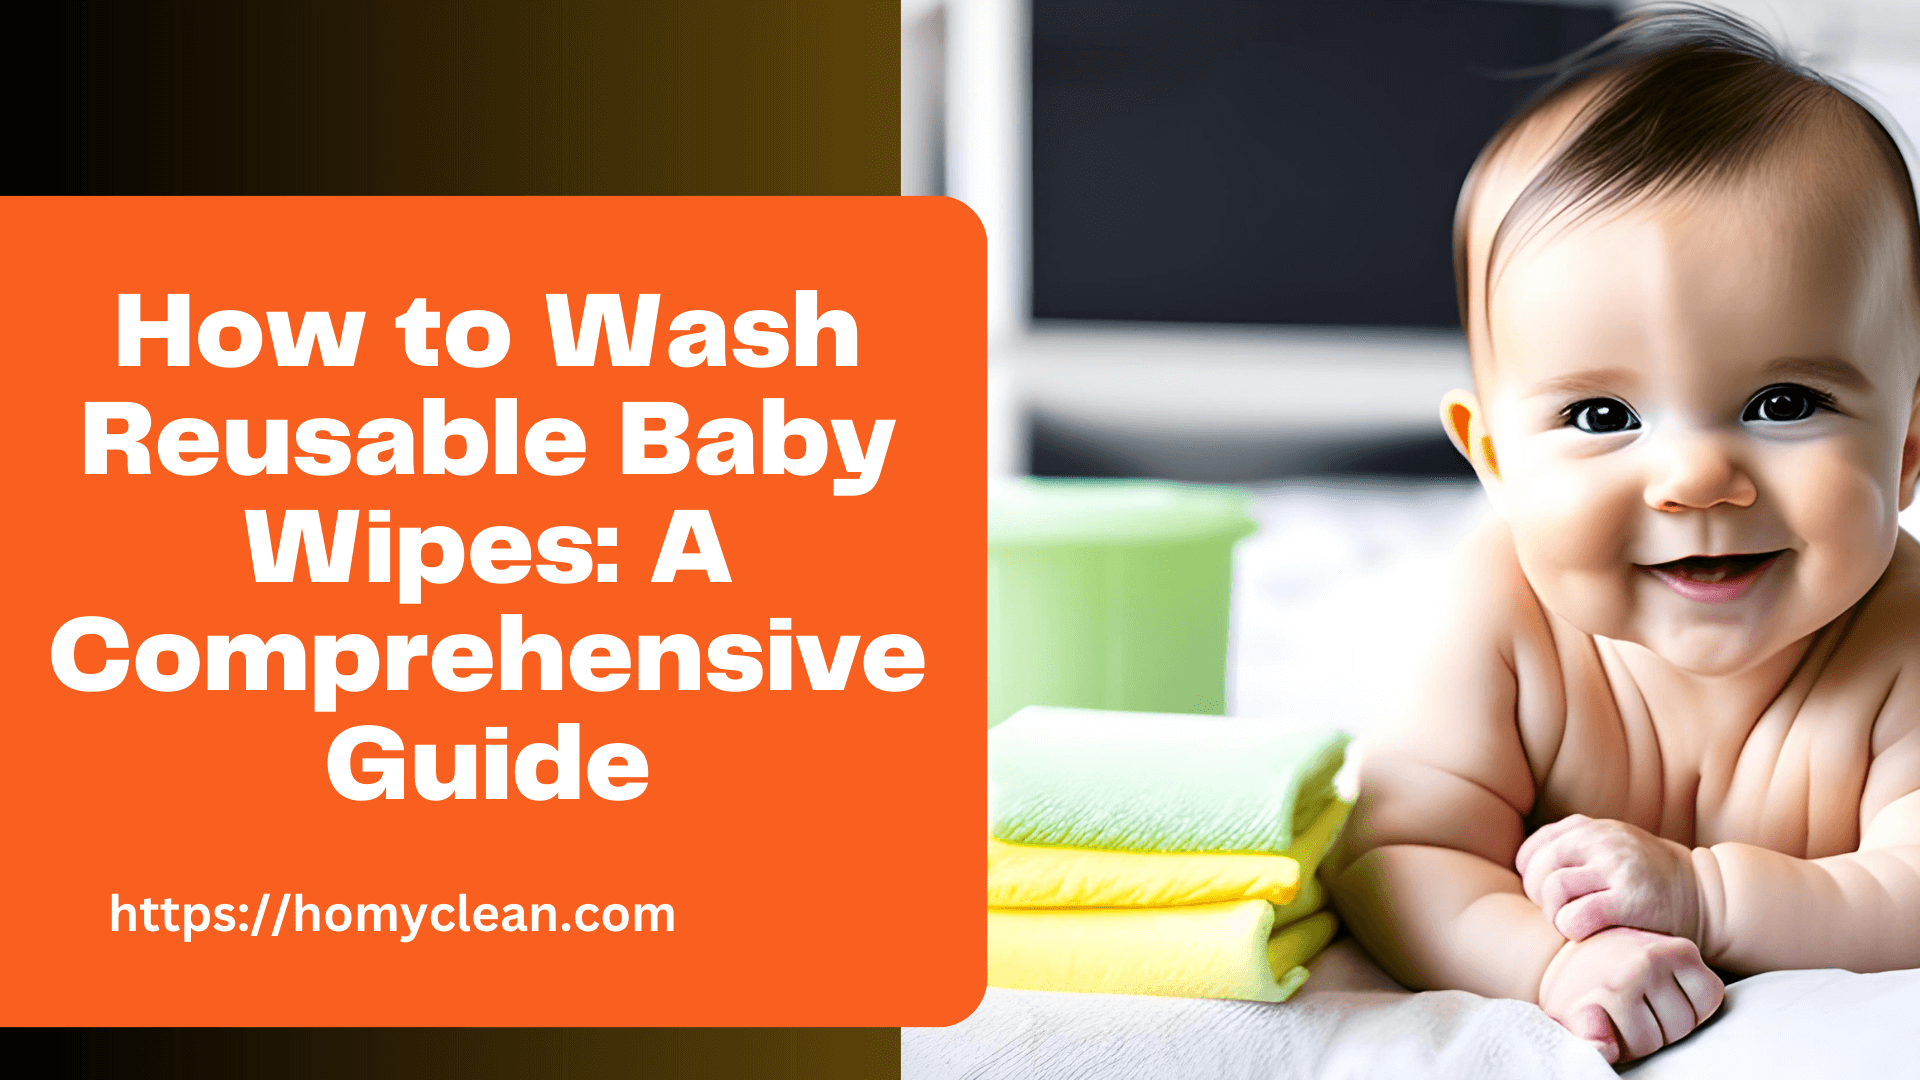 How to Wash Reusable Baby Wipes: A Comprehensive Guide